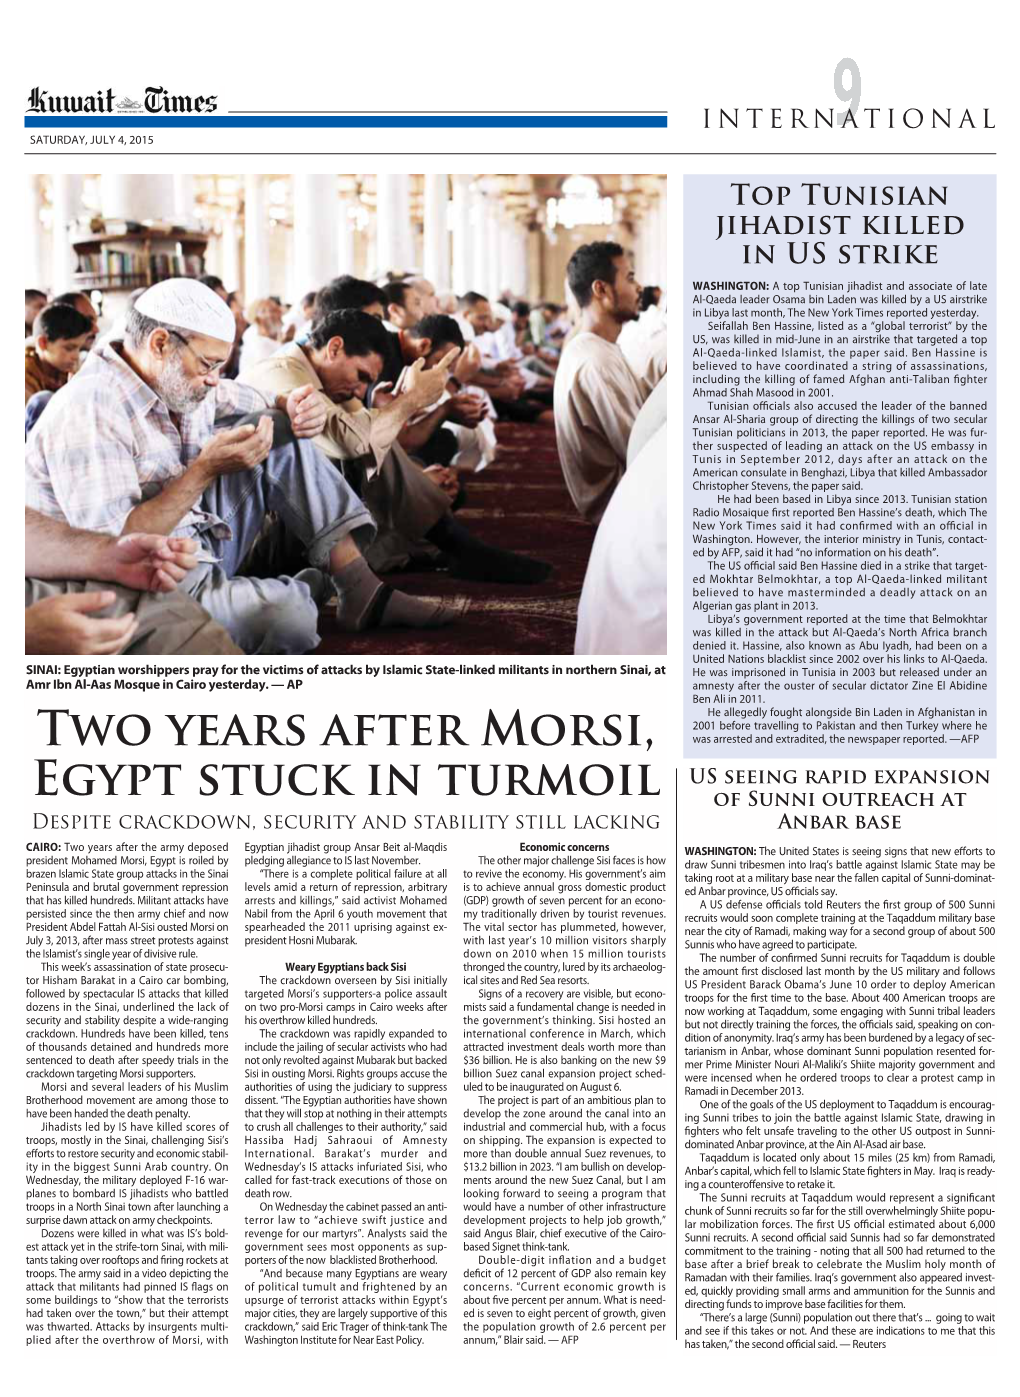 Two Years After Morsi, Egypt Stuck in Turmoil